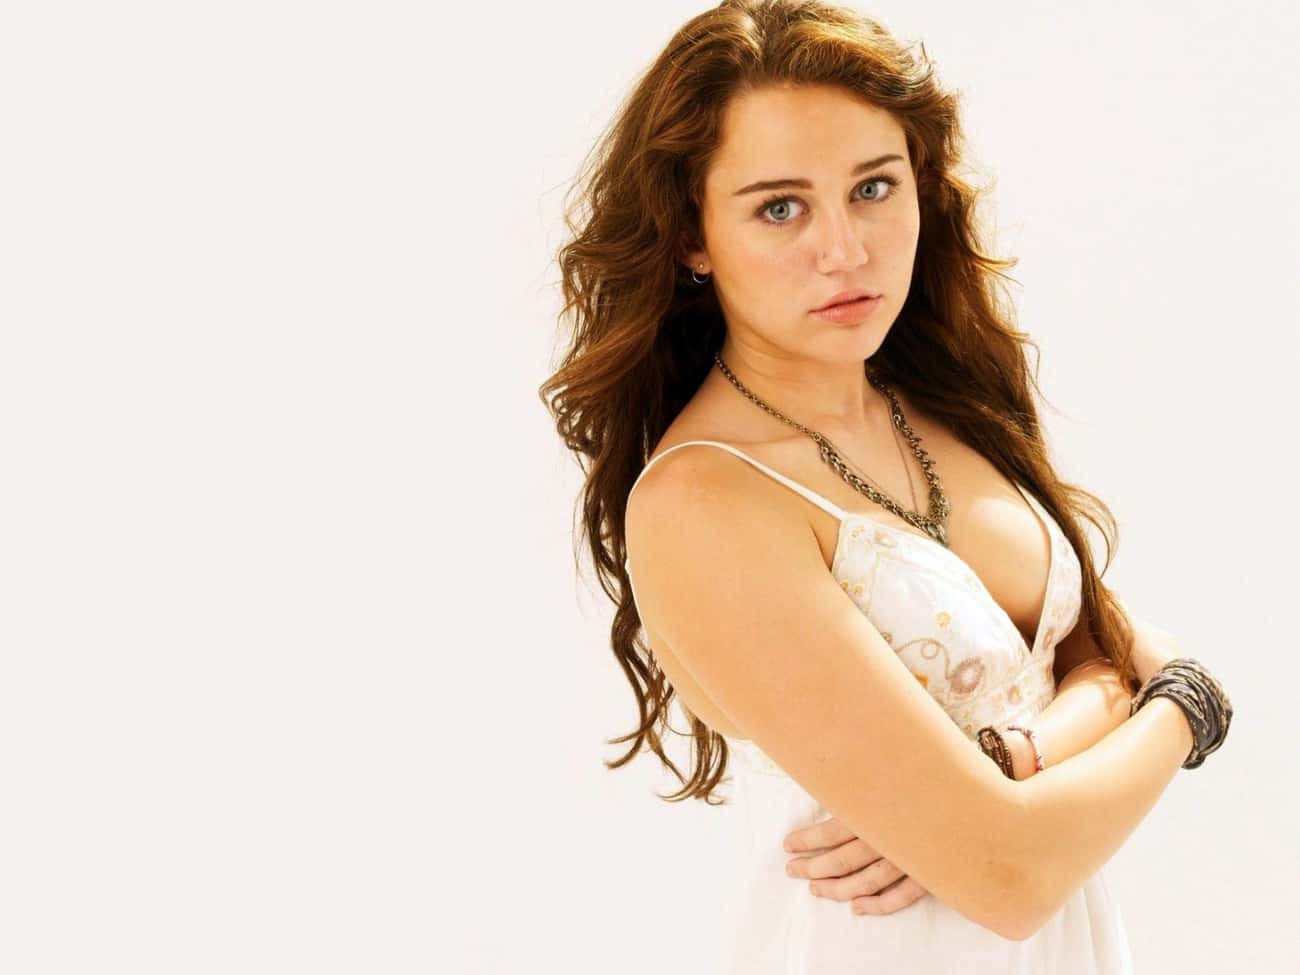 Young Miley Cyrus in White Spaghetti Strap Dress